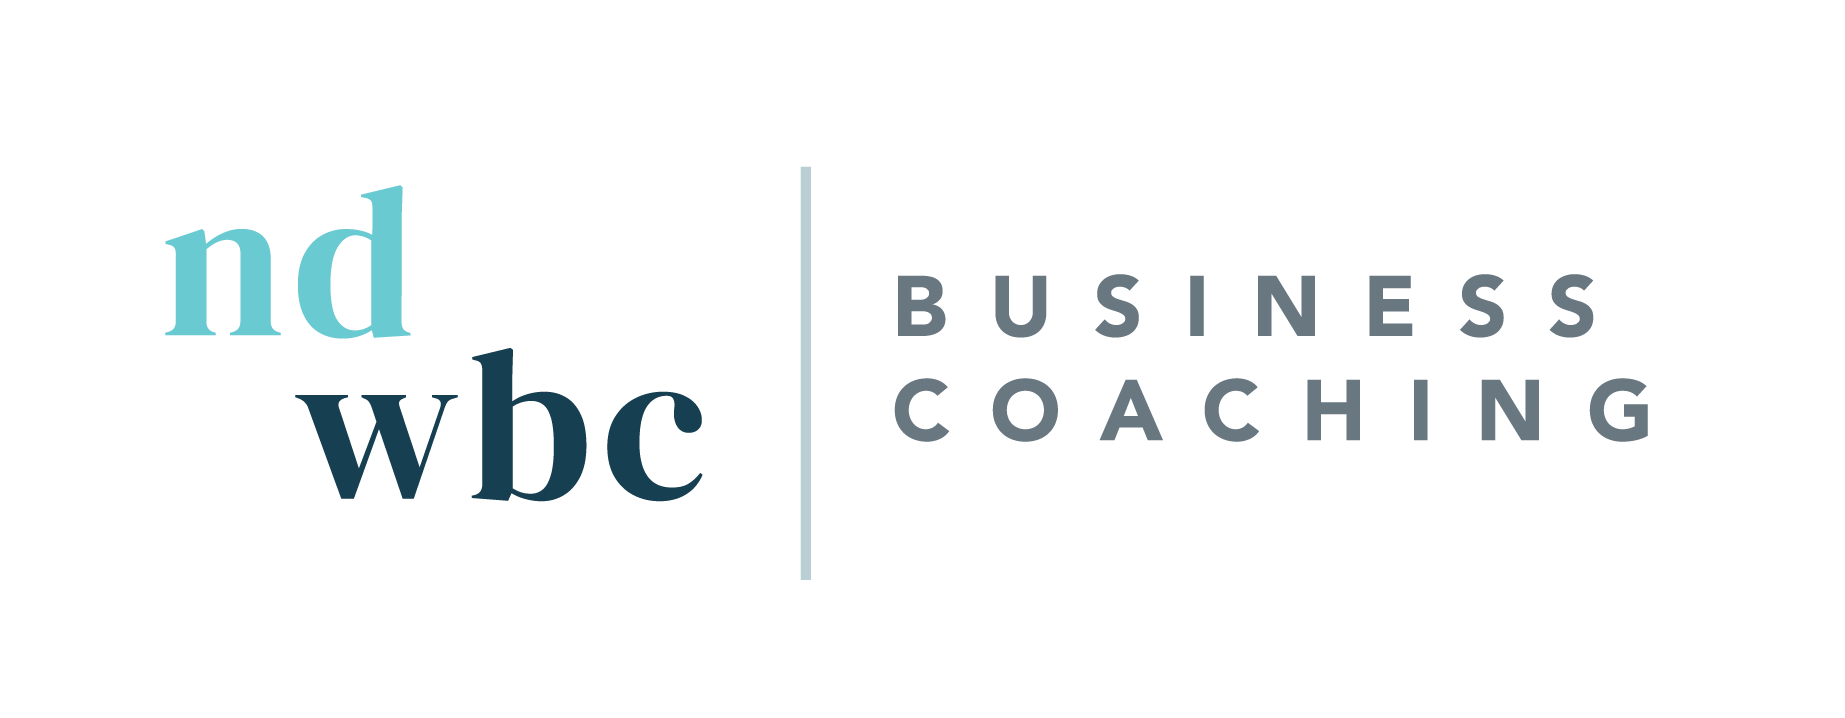 NDWBC_Acronym 1_Business Coaching_Color.png